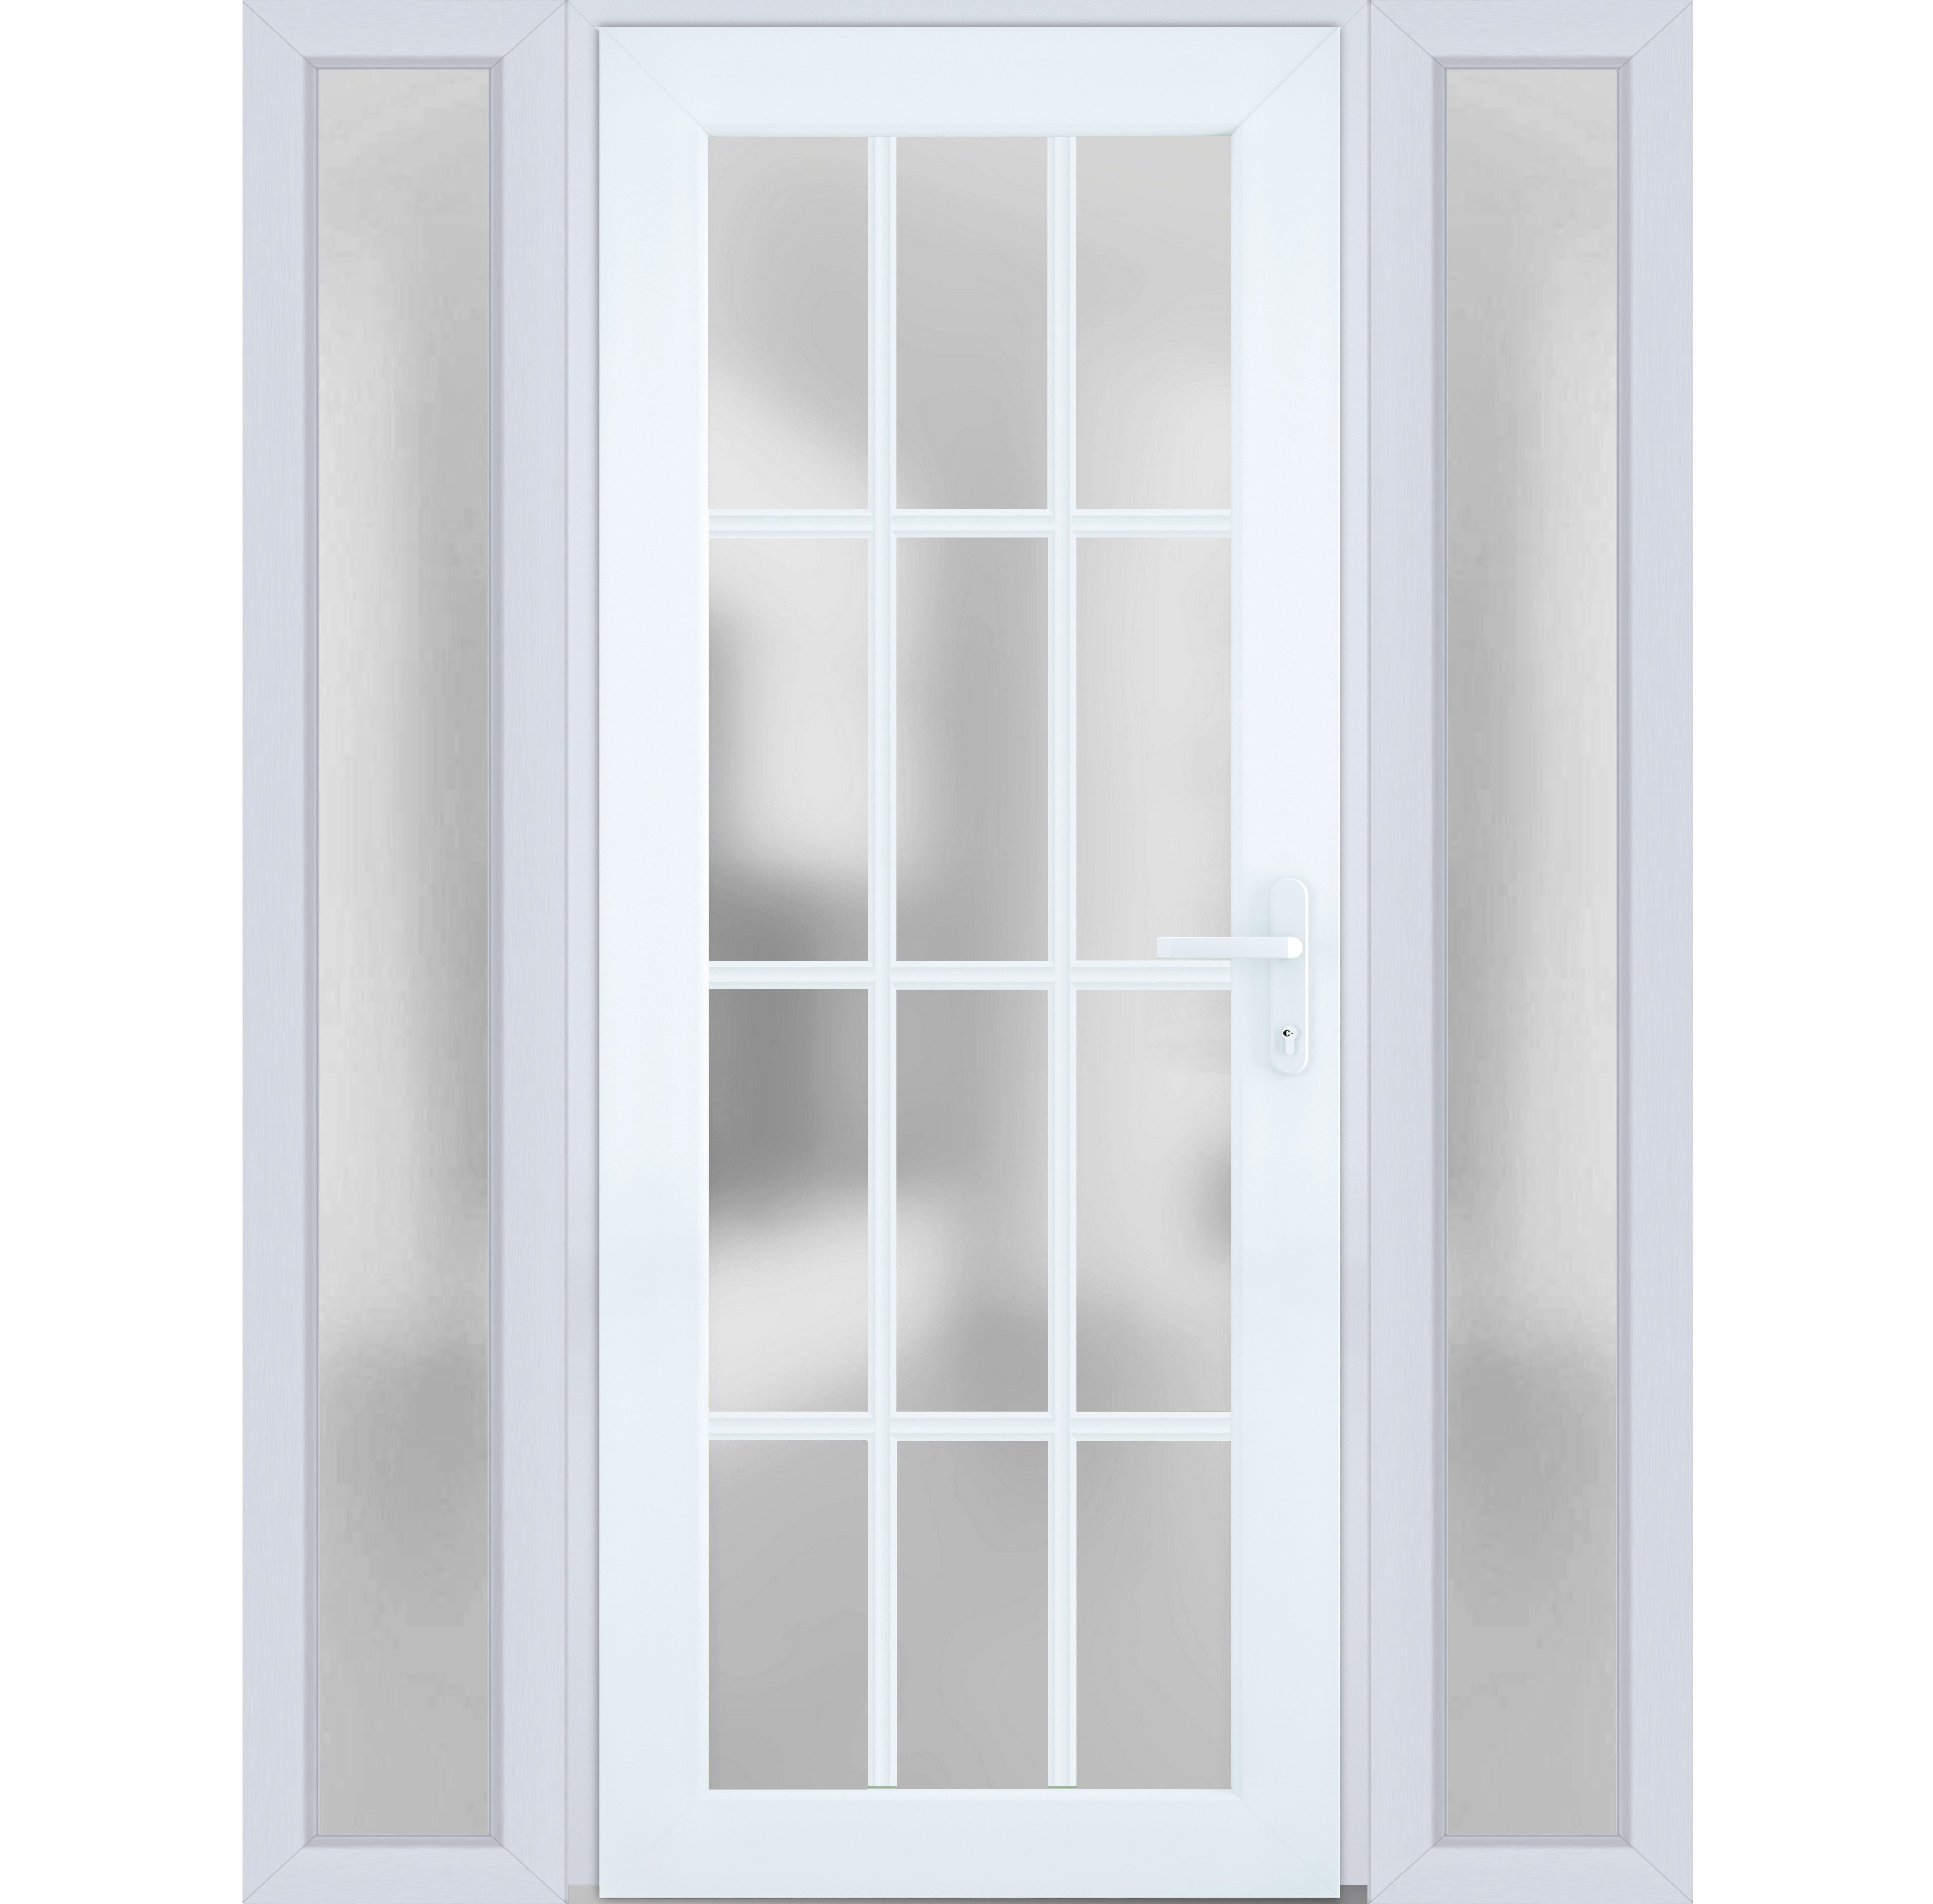 Front Exterior Prehung Metal-Plastic Door Frosted Glass / Manux 8312 White  Silk / 2 Side Windows / Office Commercial and Residential Doors Entrance  Patio Garage 60 x 80 Left-hand Inswing 